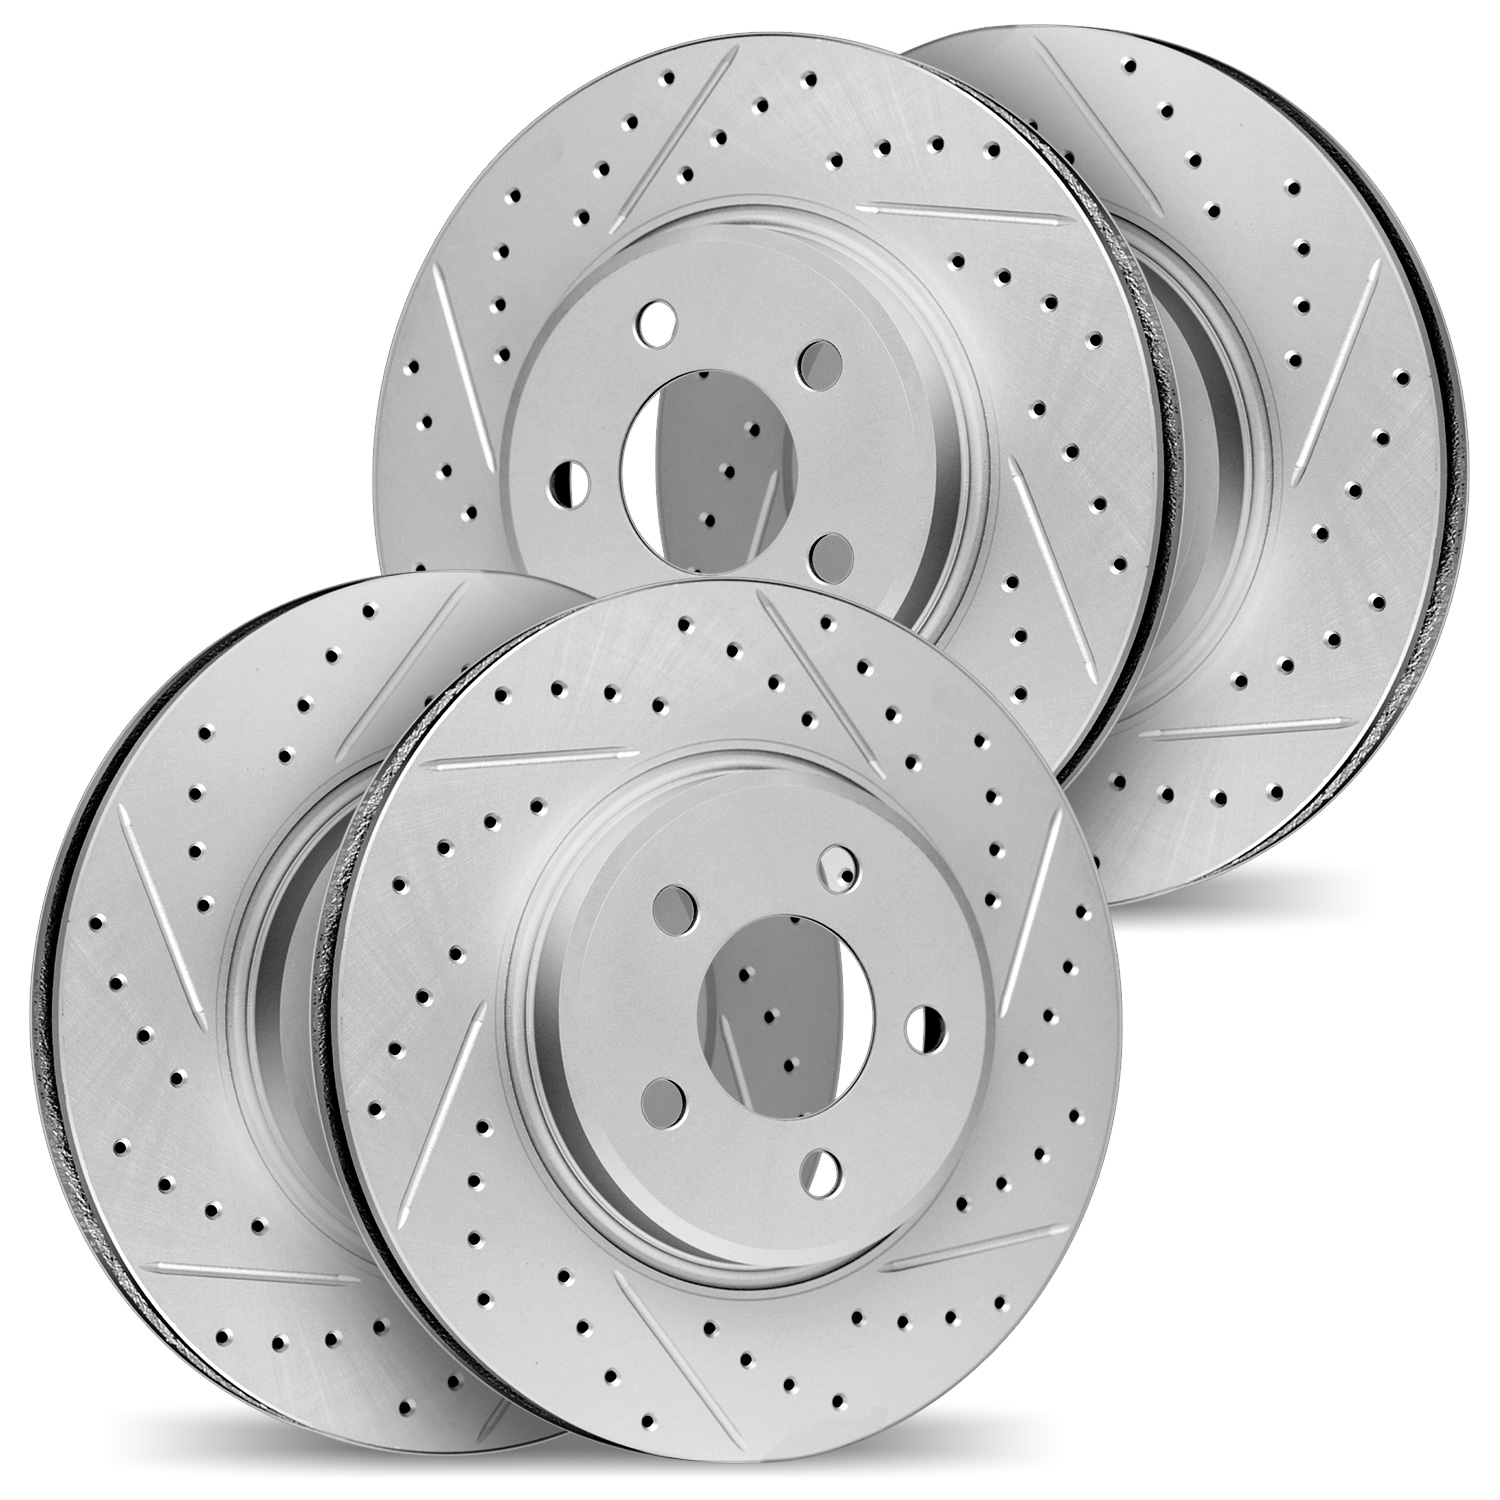 2004-48019 Geoperformance Drilled/Slotted Brake Rotors, 1997-2005 GM, Position: Front and Rear